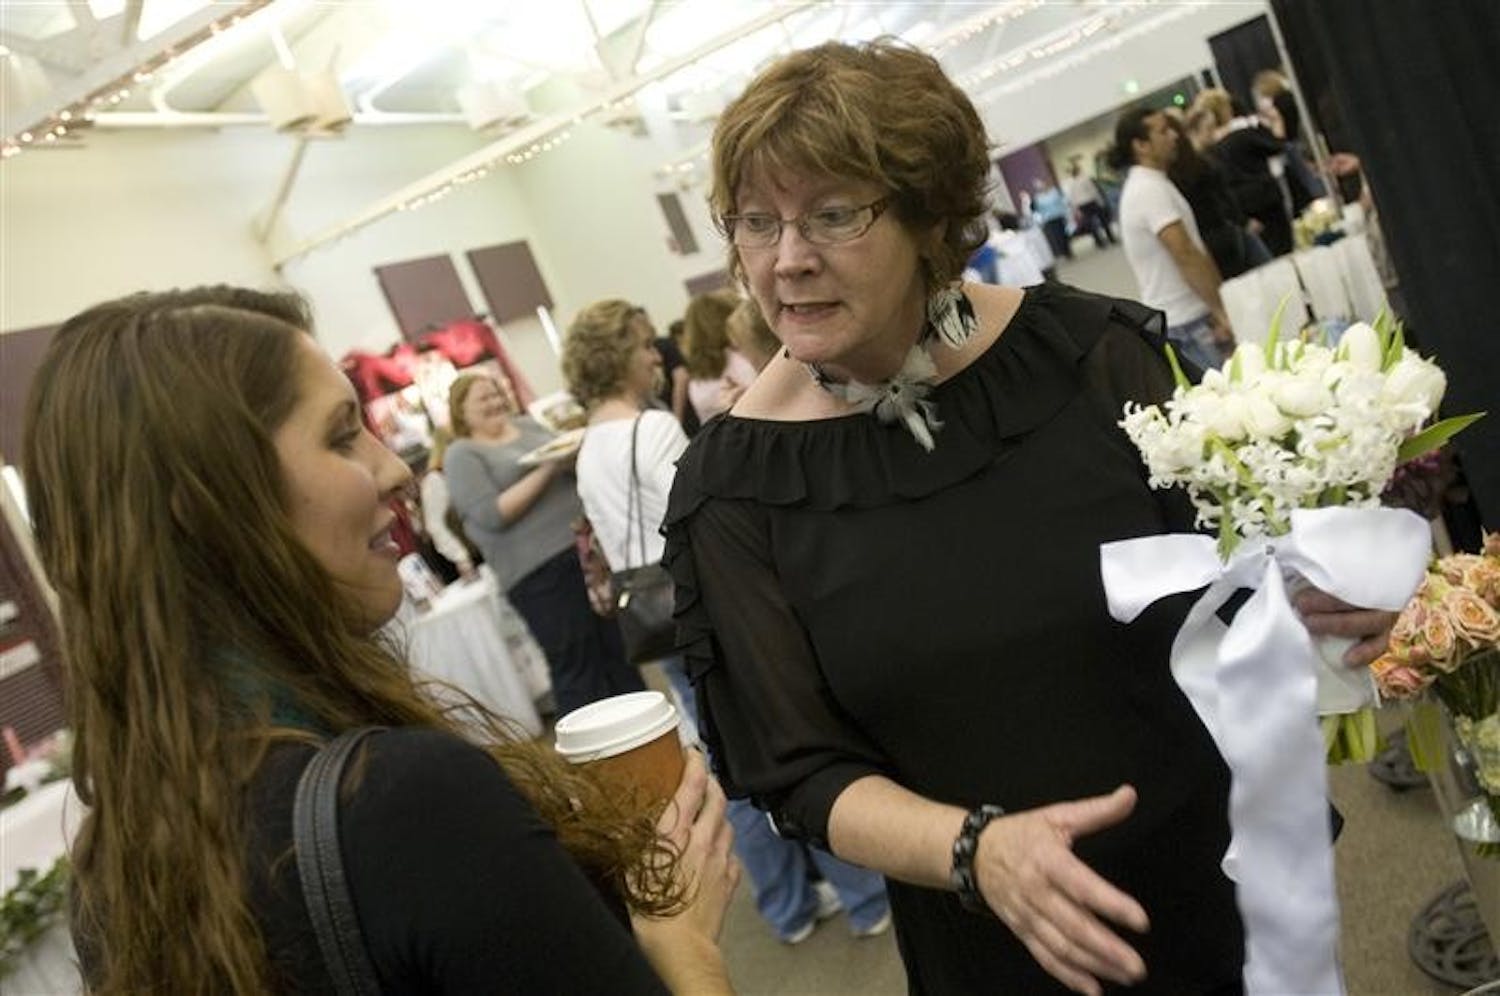 Teresa Kinder, right, of Artful Blooms Florist shows Angie Botos a bridal boquet Sunday afternoon at the Bloomington Bridal Show in the Bloomington Convention Center.